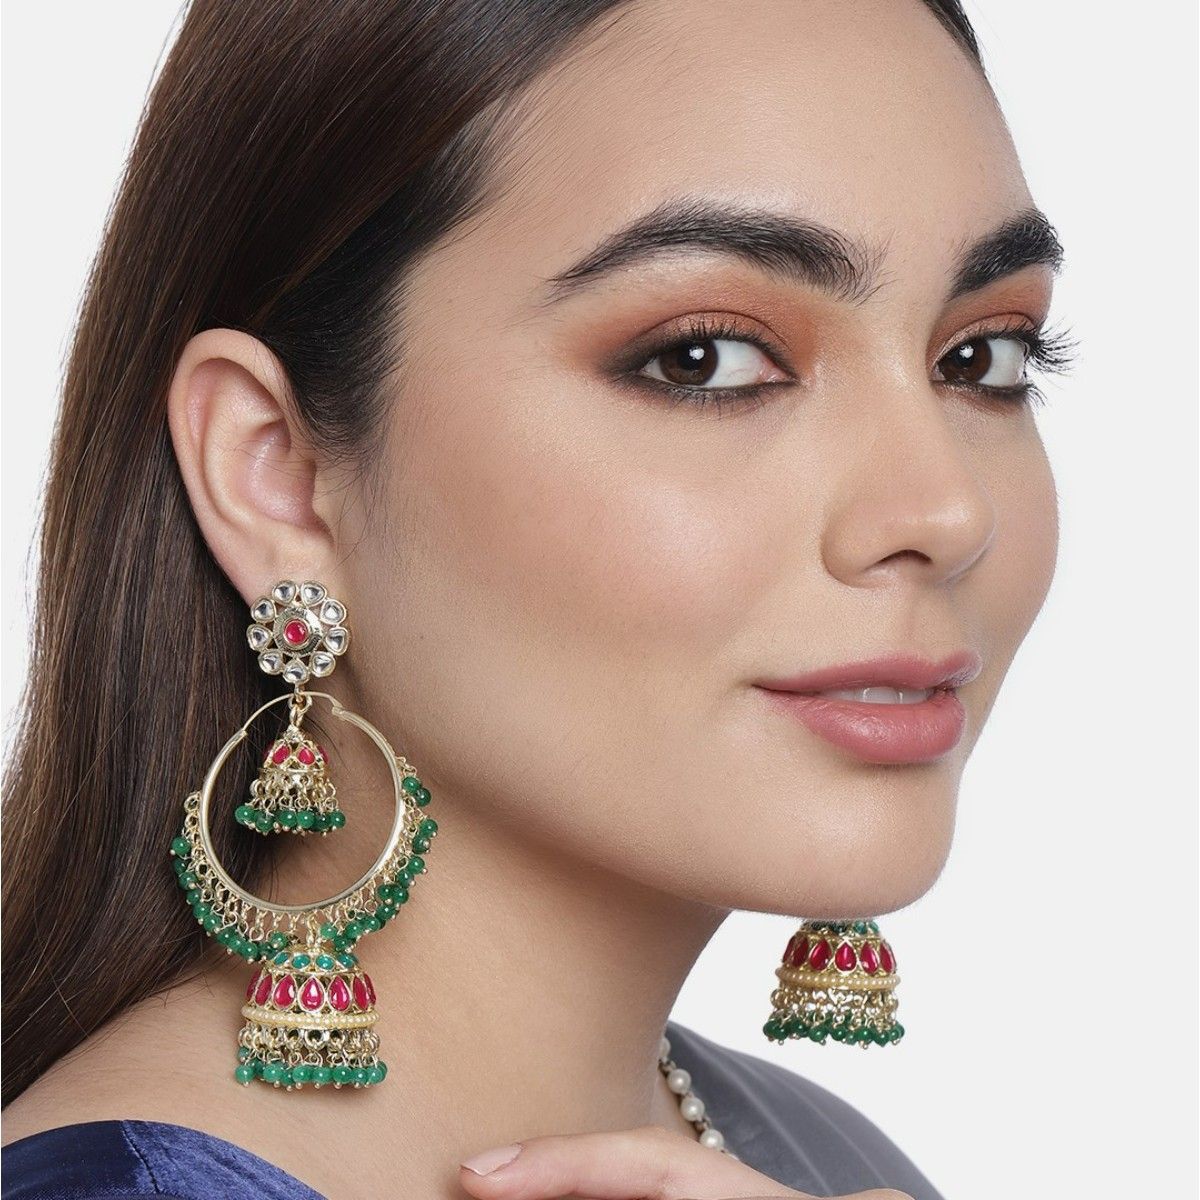 1 Gram Gold Jhumkas With Ruby Emerald Collections ER2524